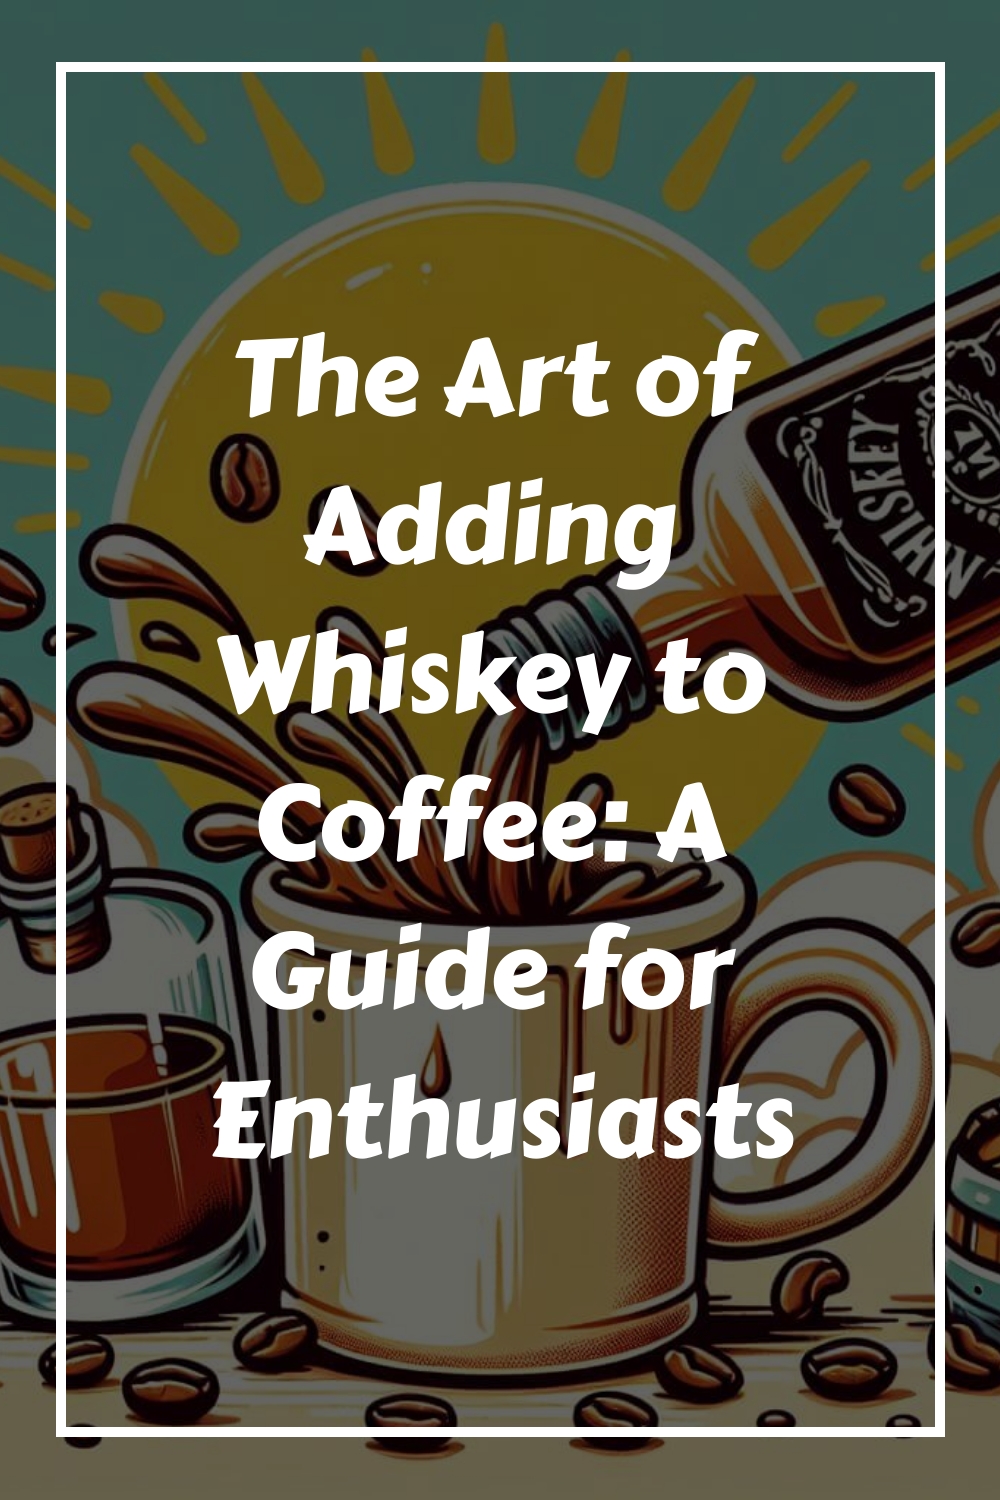 The Art of Adding Whiskey to Coffee A Guide for Enthusiasts generated pin 5225